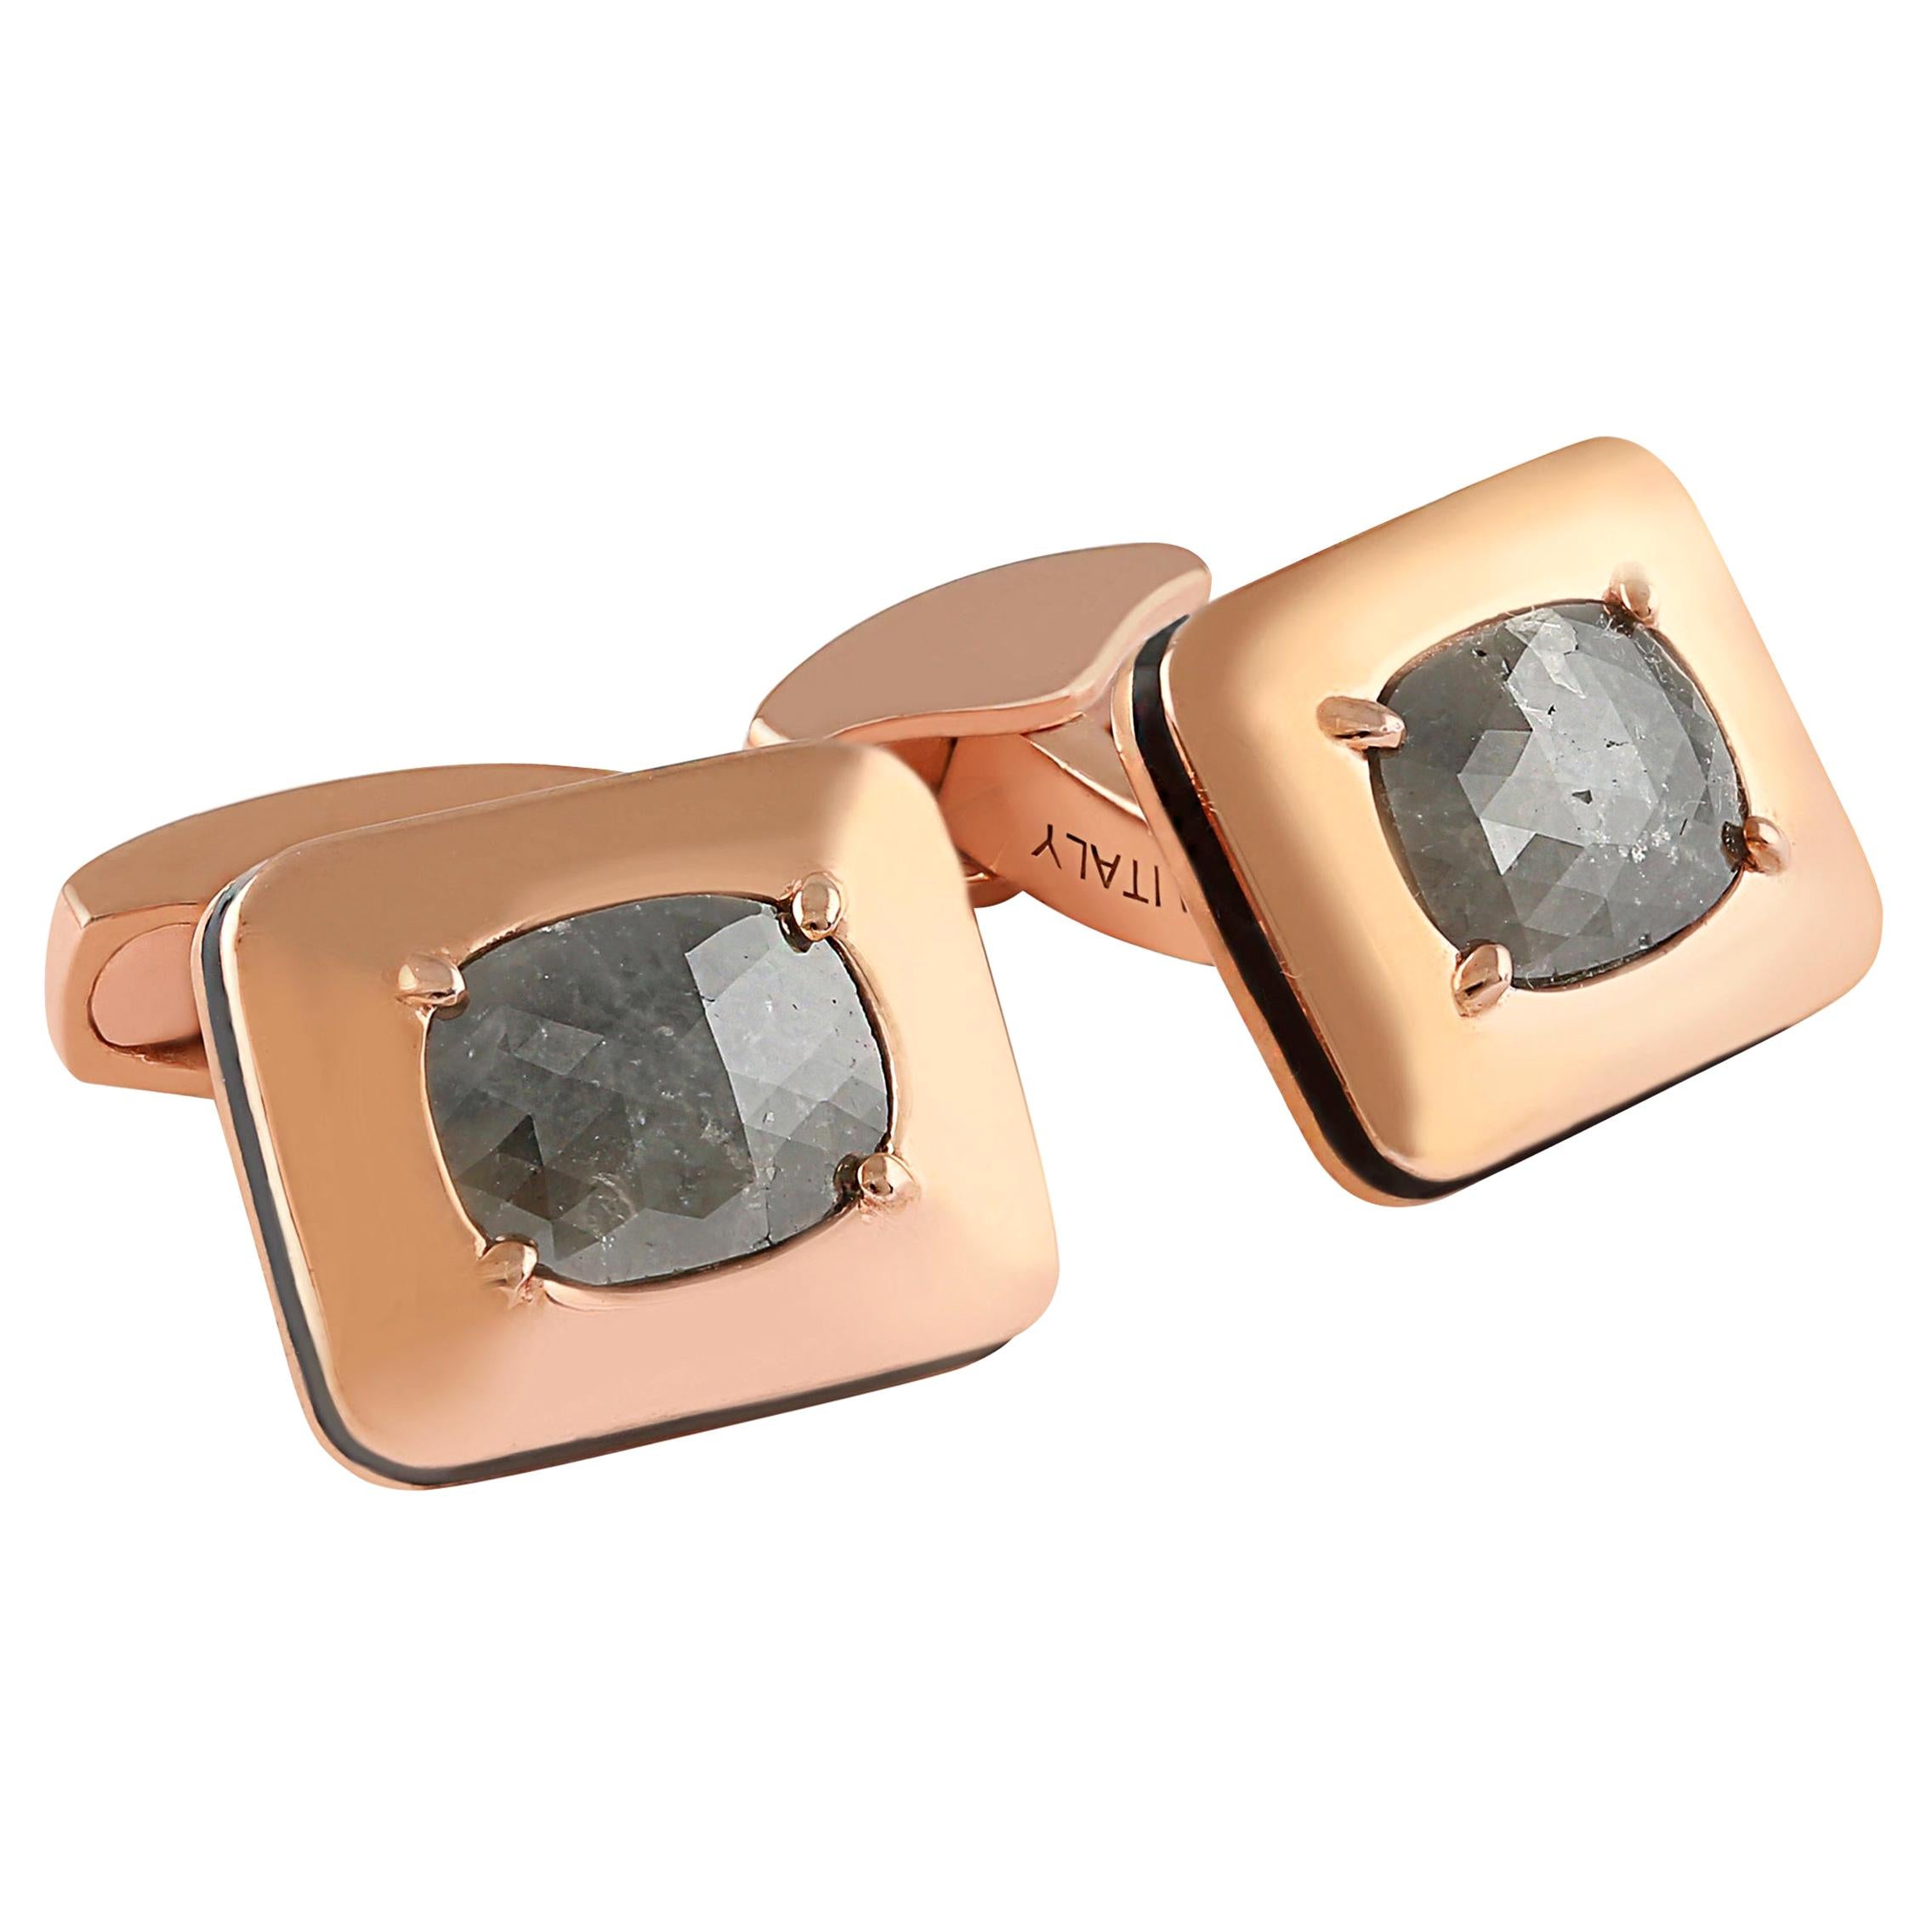 Tateossian Rose Cut Diamond Cufflinks, Rose Gold-Plated 'Limited Edition- 1/1' For Sale